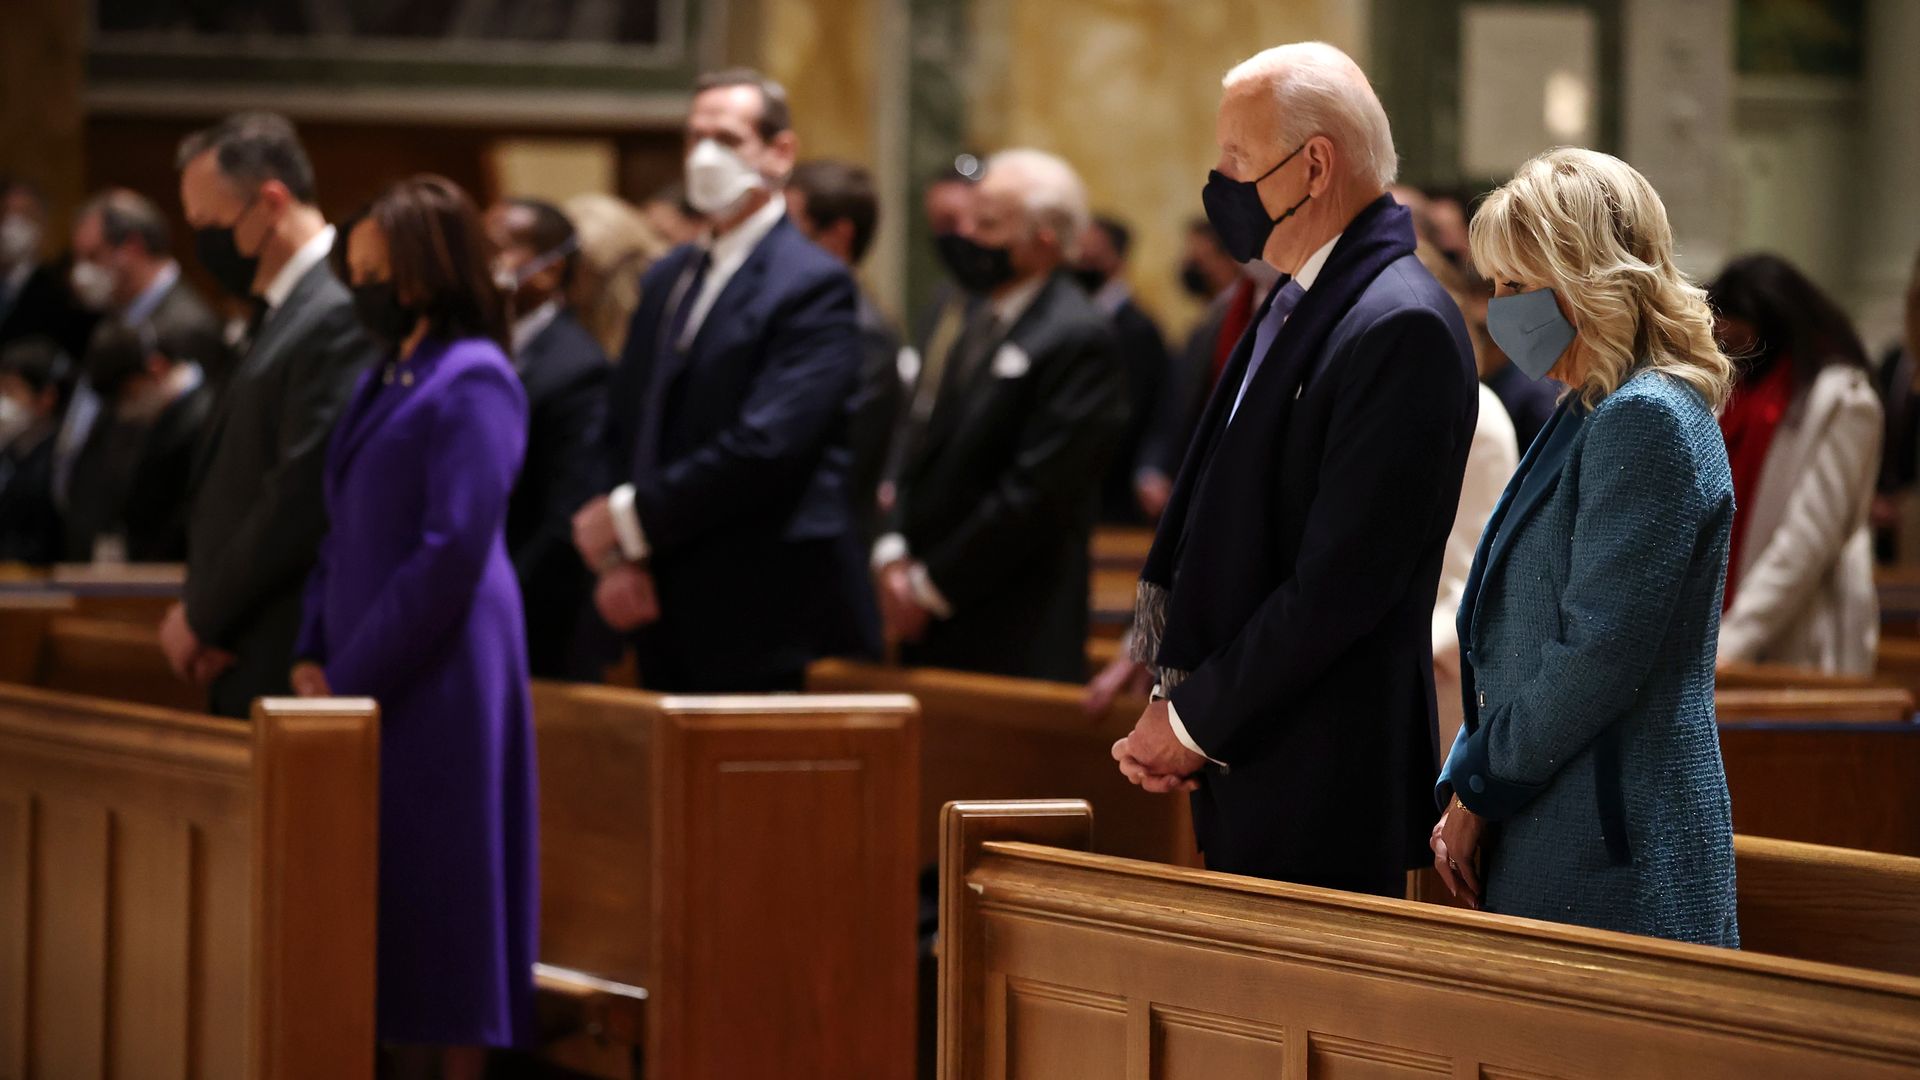 Picture of the Bidens and other political leaders attending church